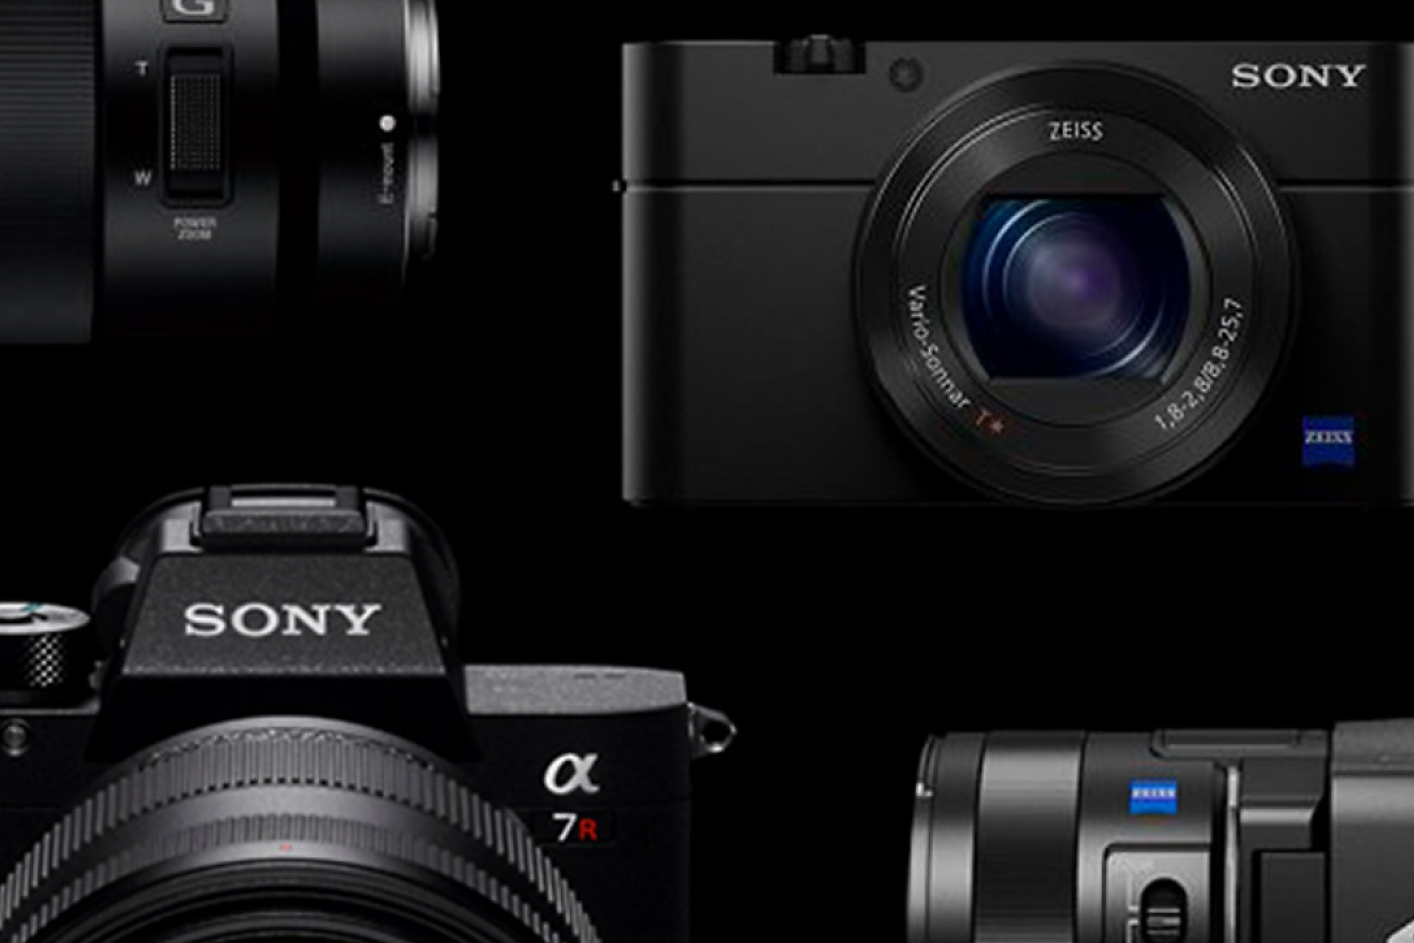 An Alpha lens, Alpha camera, camcorder and compact camera on a black background.